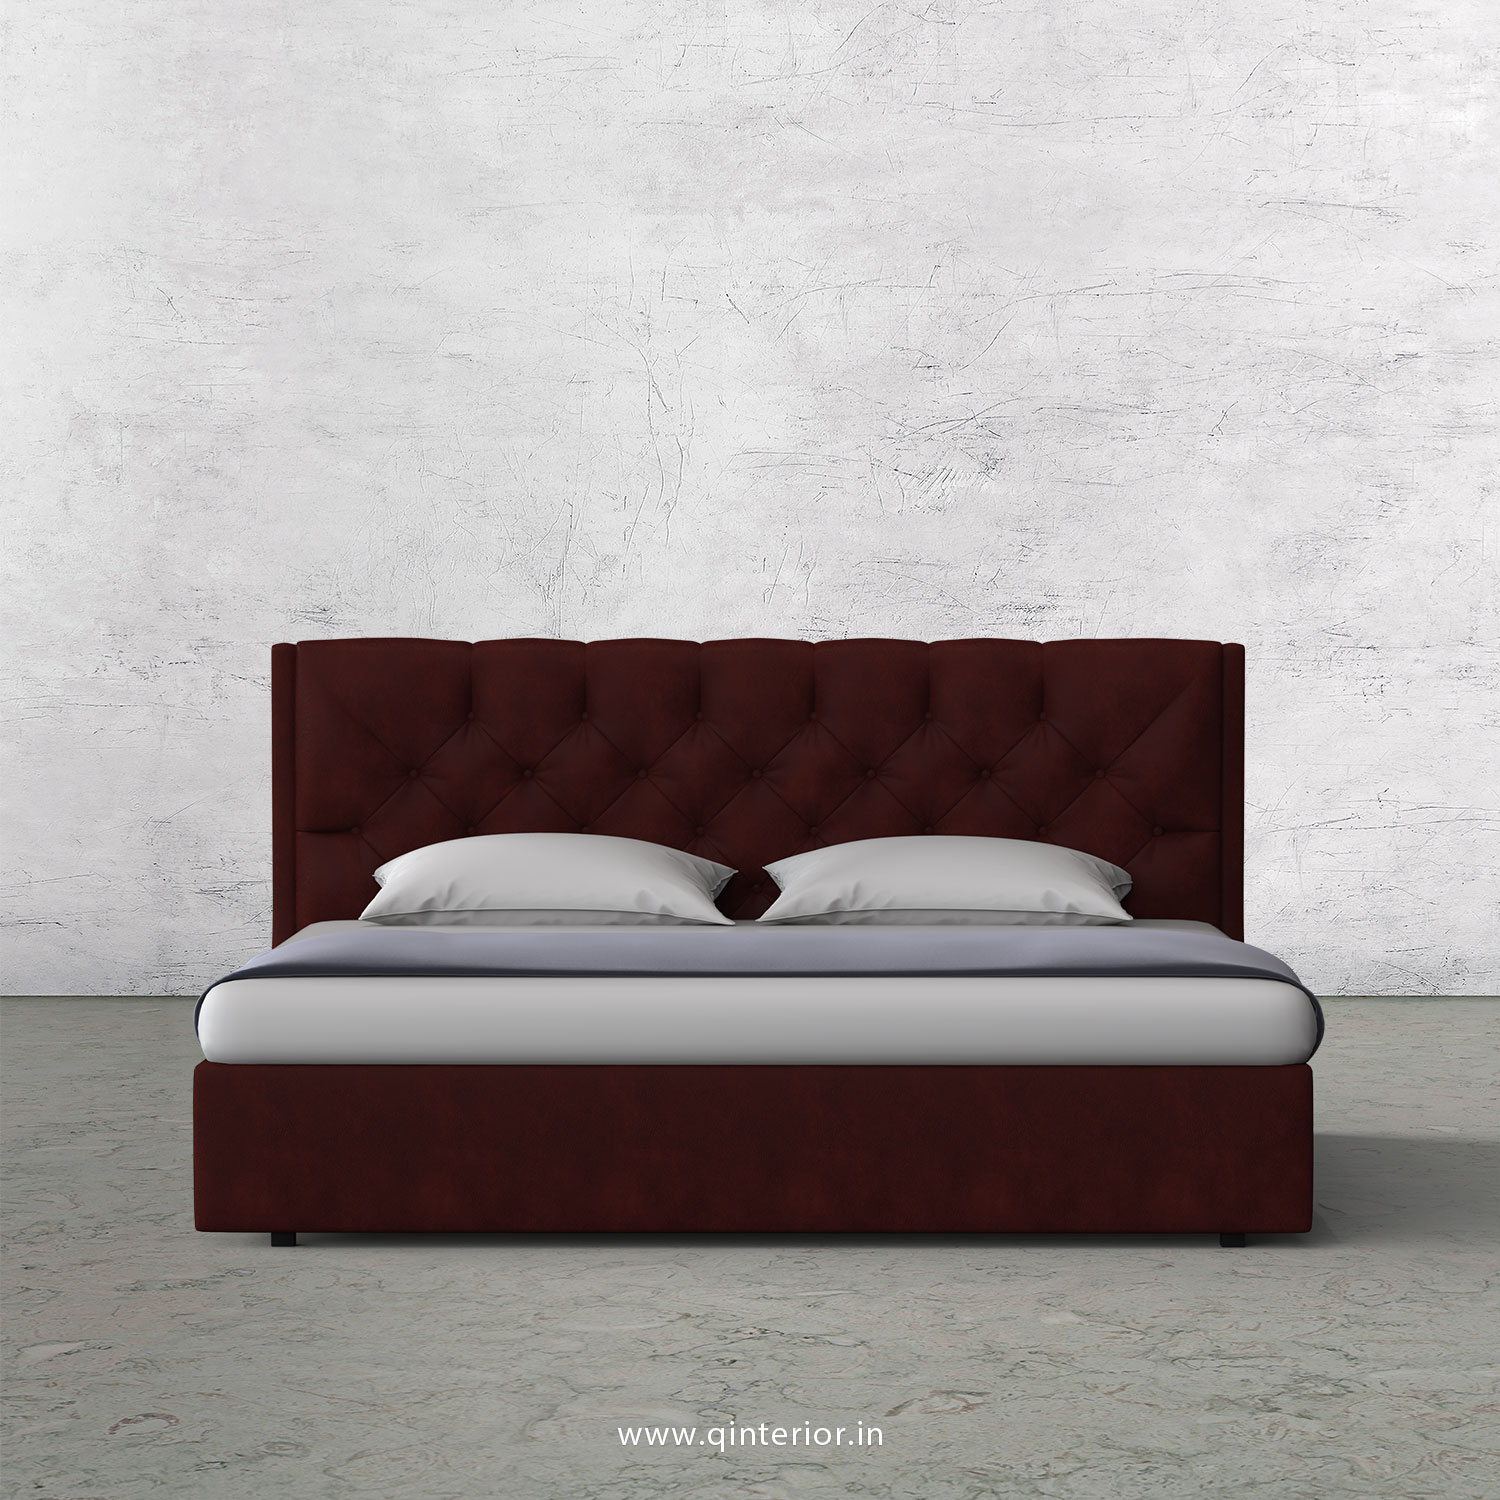 Scorpius King Size Bed in Fab Leather Fabric - KBD009 FL17